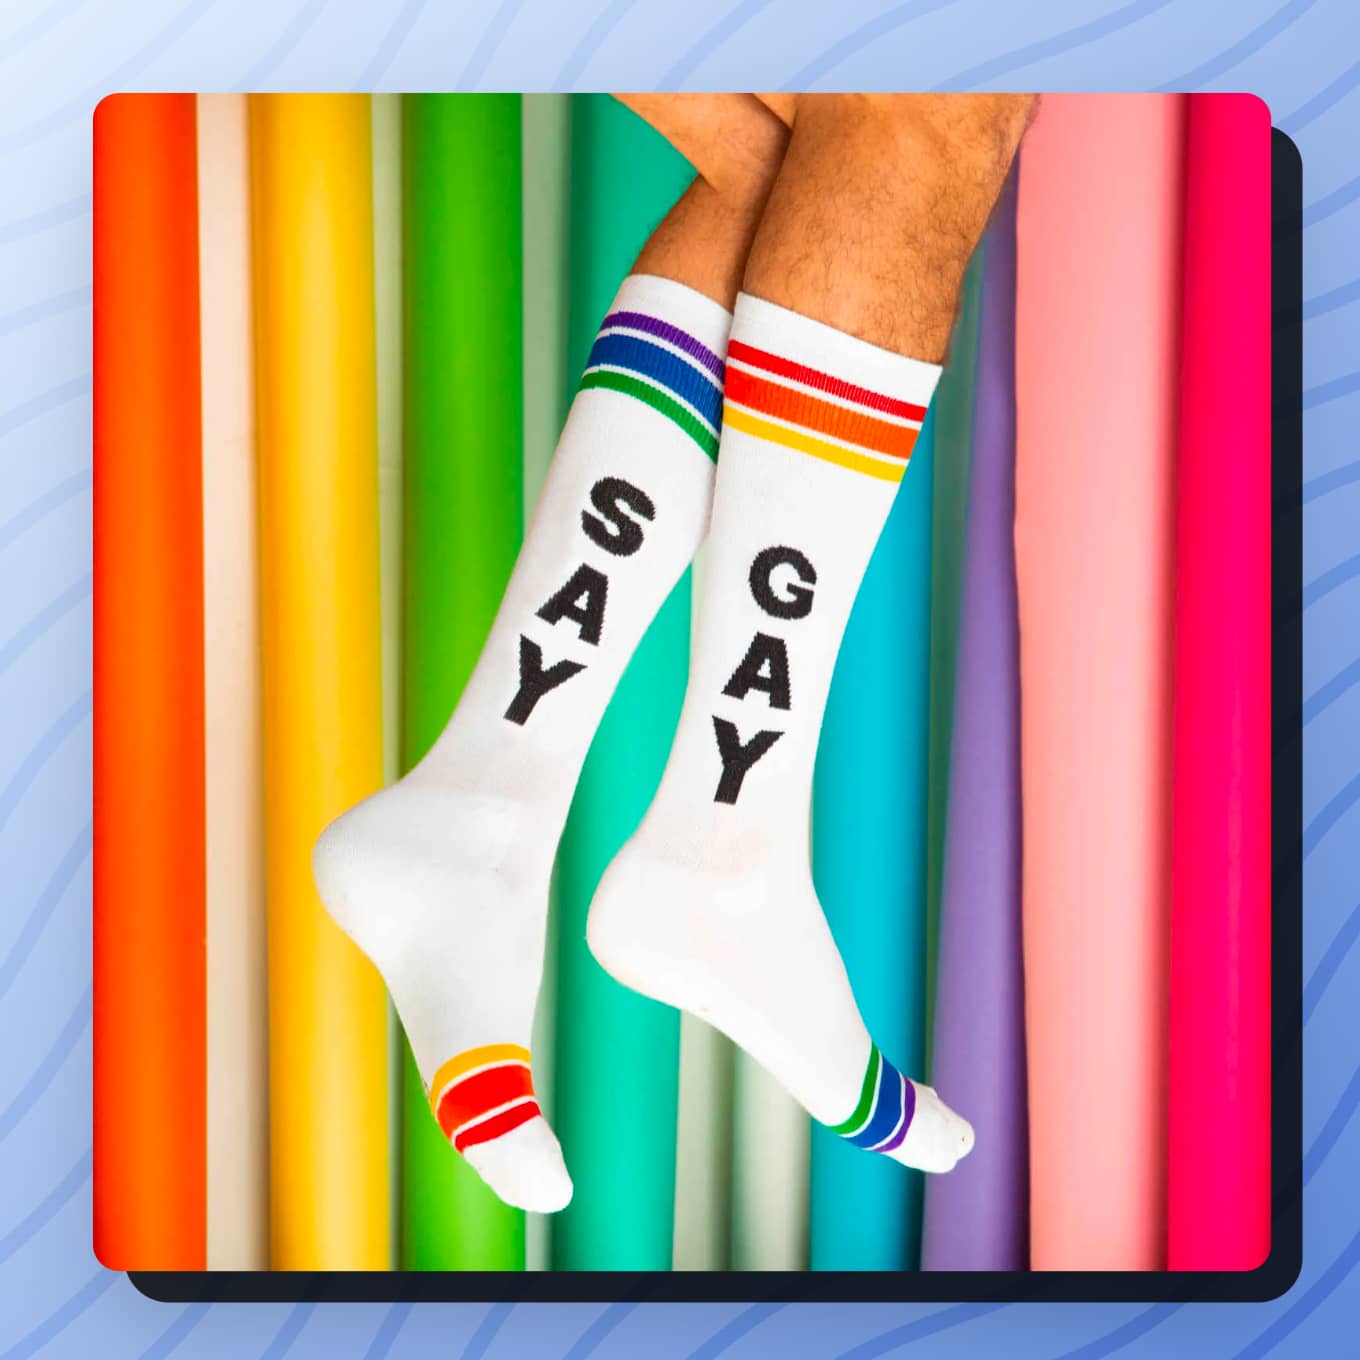 One sock that says Say and another sock that says Gay